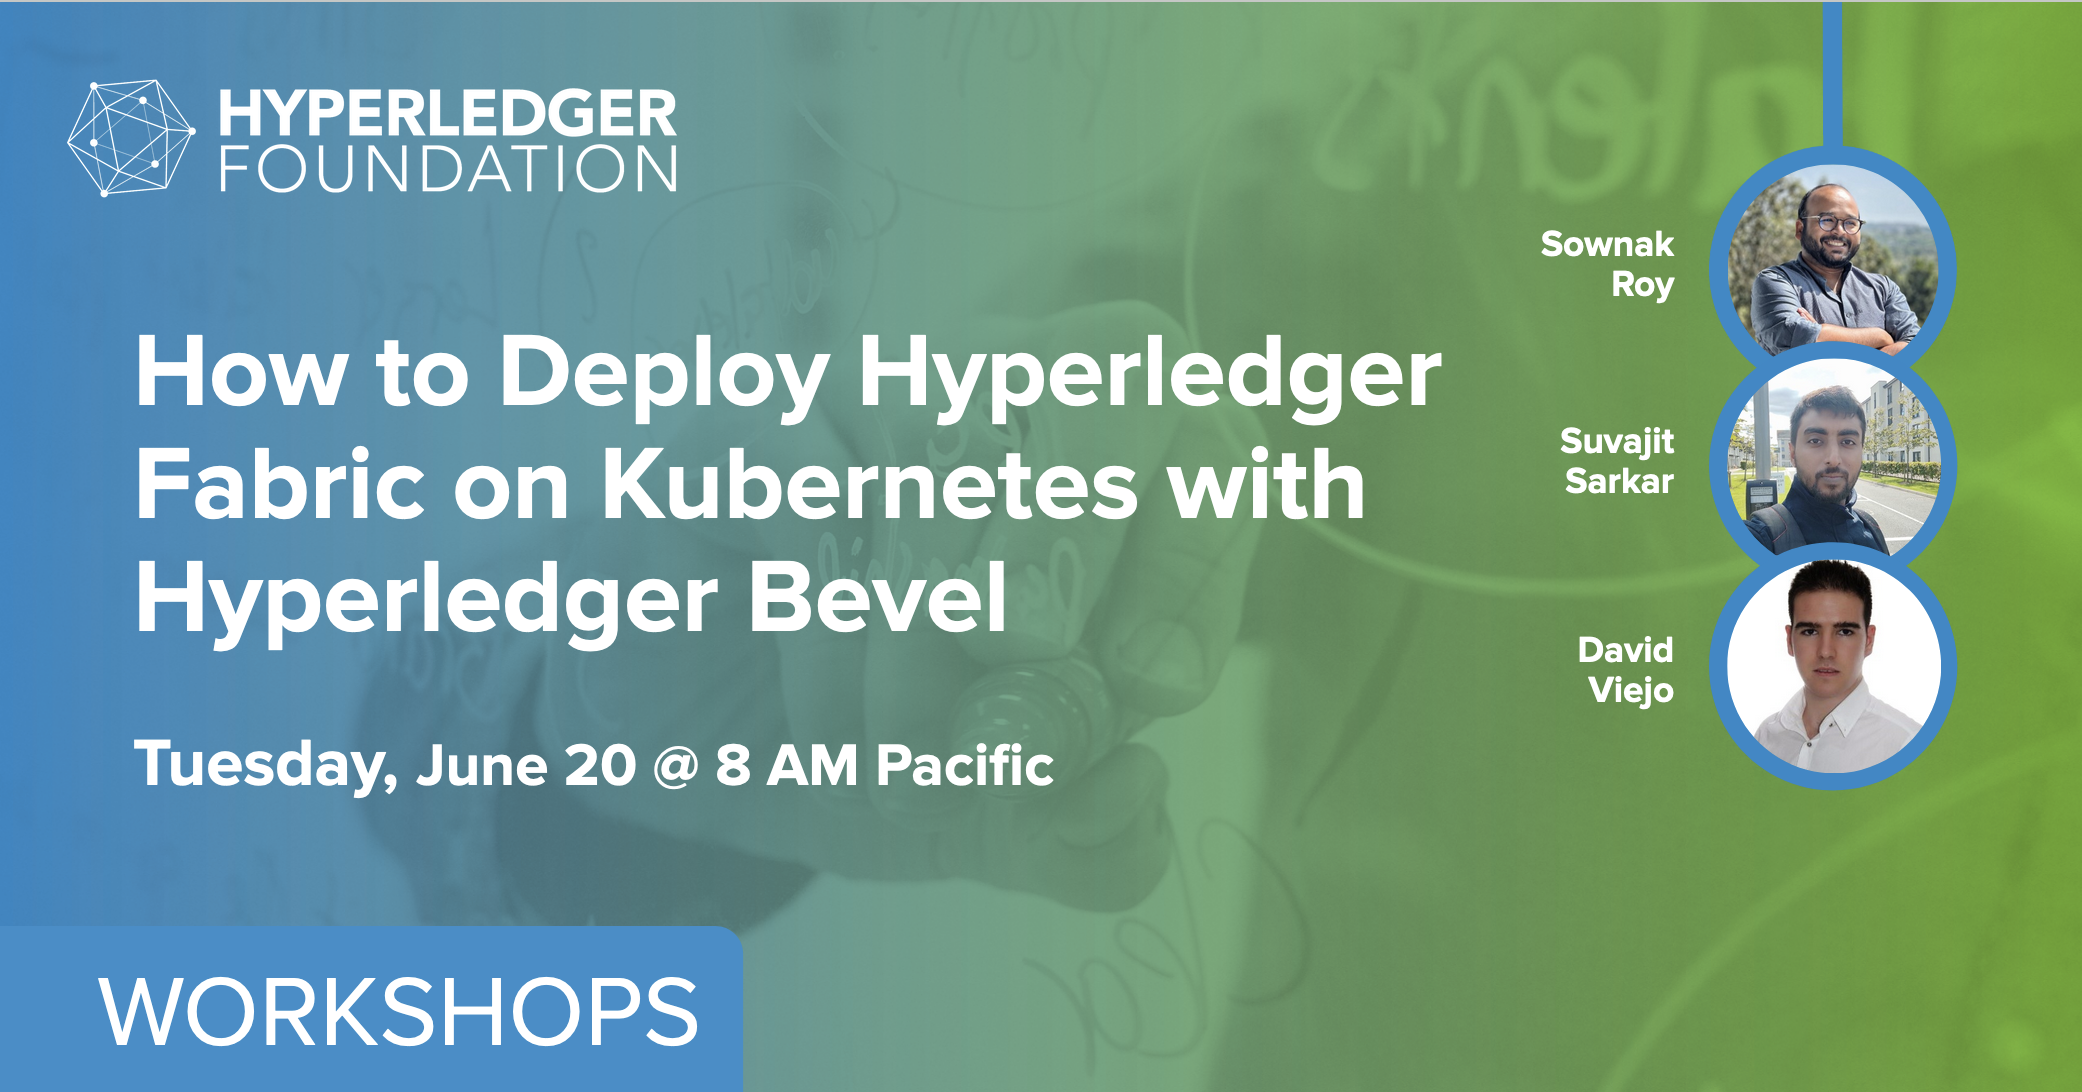 How to Deploy Hyperledger Fabric on Kubernetes with Hyperledger Bevel featured image